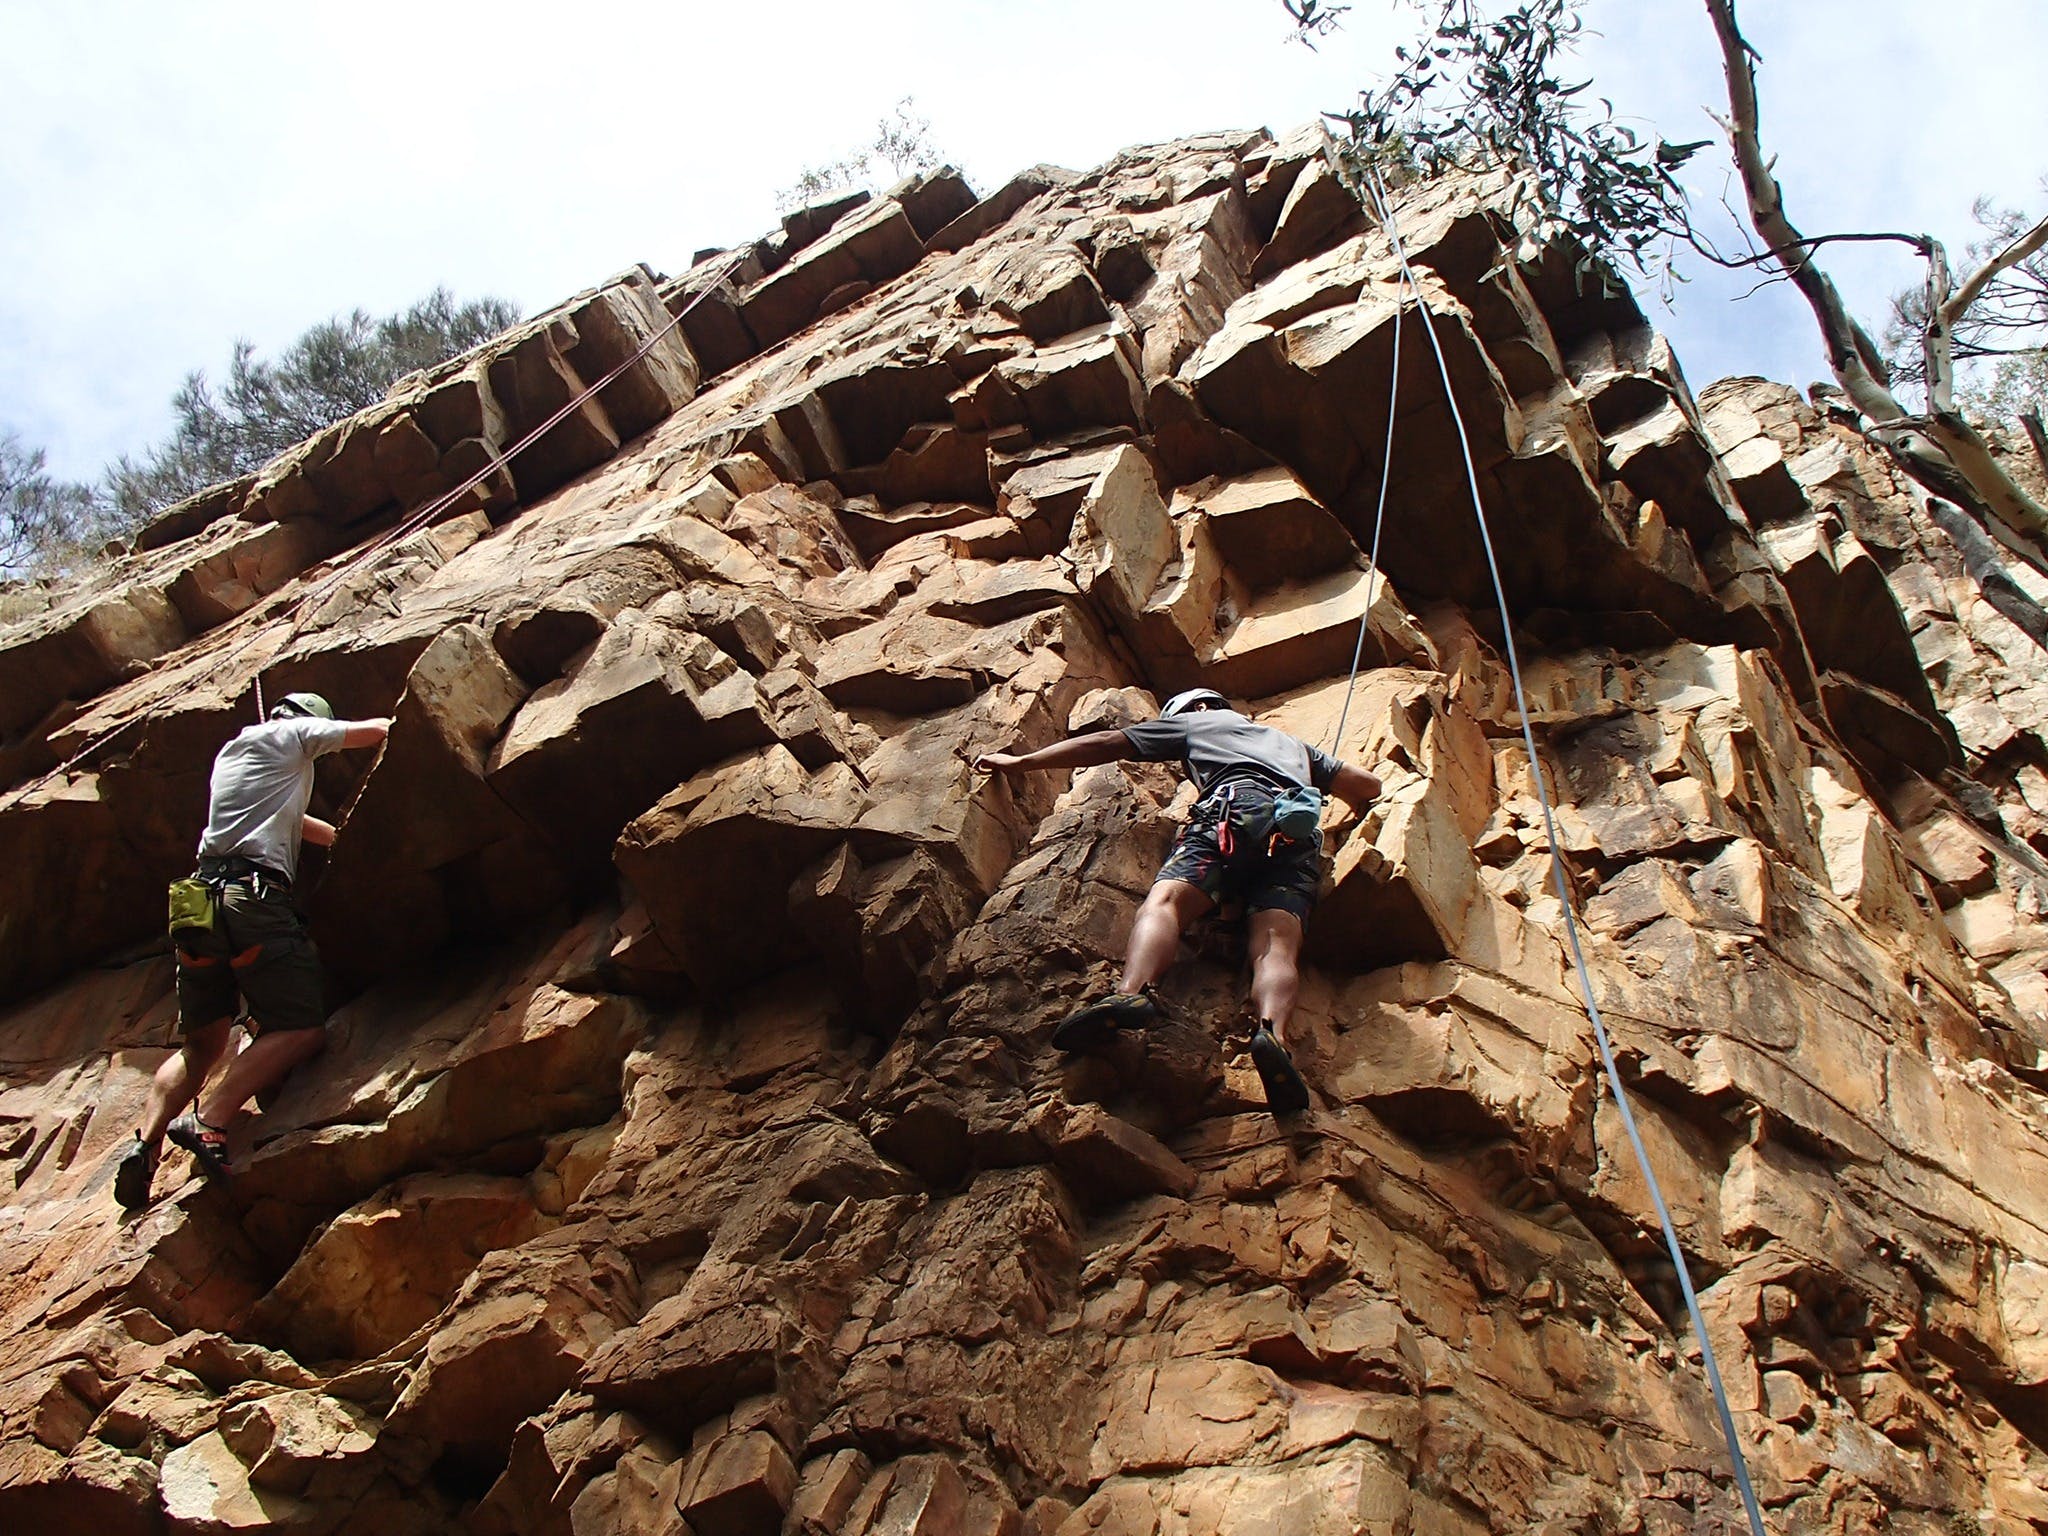 Rock Climbing in Morialta - Accommodation Bookings